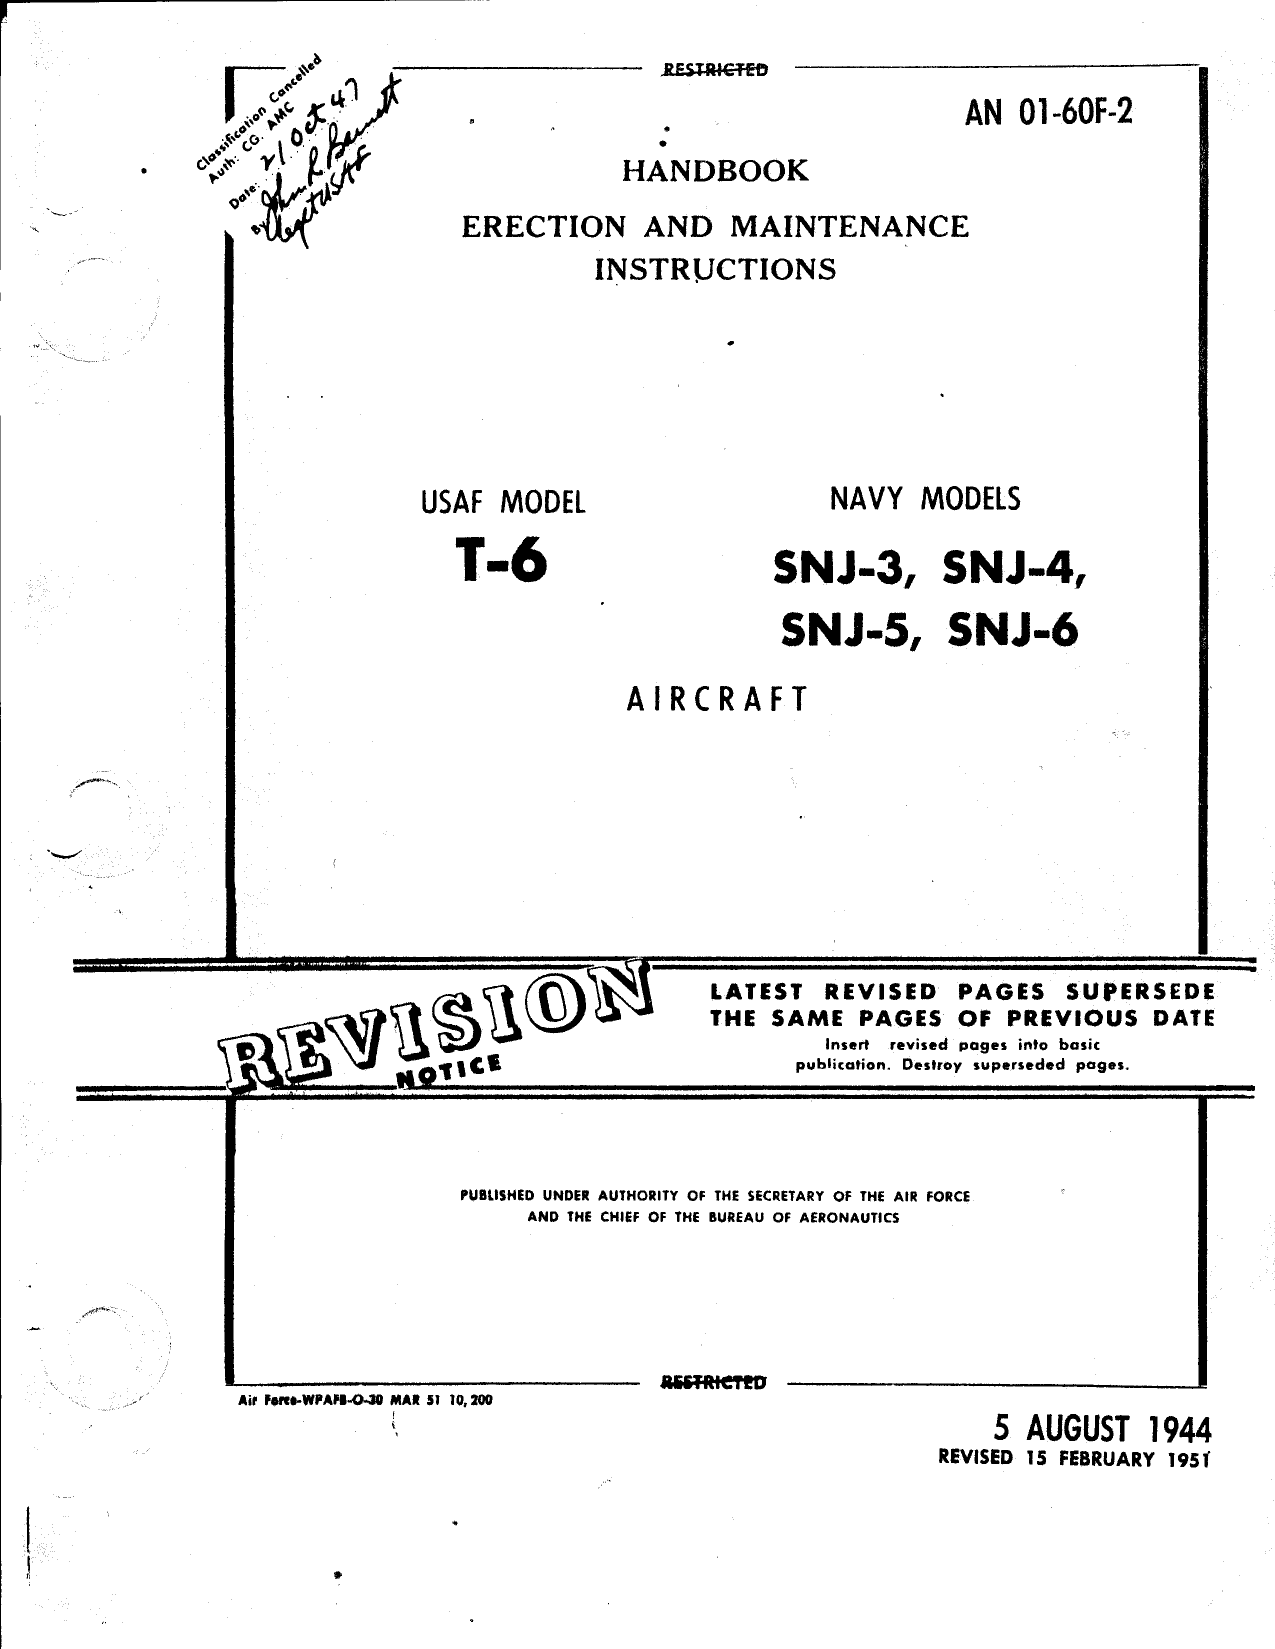 Sample page 1 from AirCorps Library document: Erection and Maintenance Instructions for T-6, SNJ-3, SNJ-4, SNJ-5, and SNJ-6 Aircraft